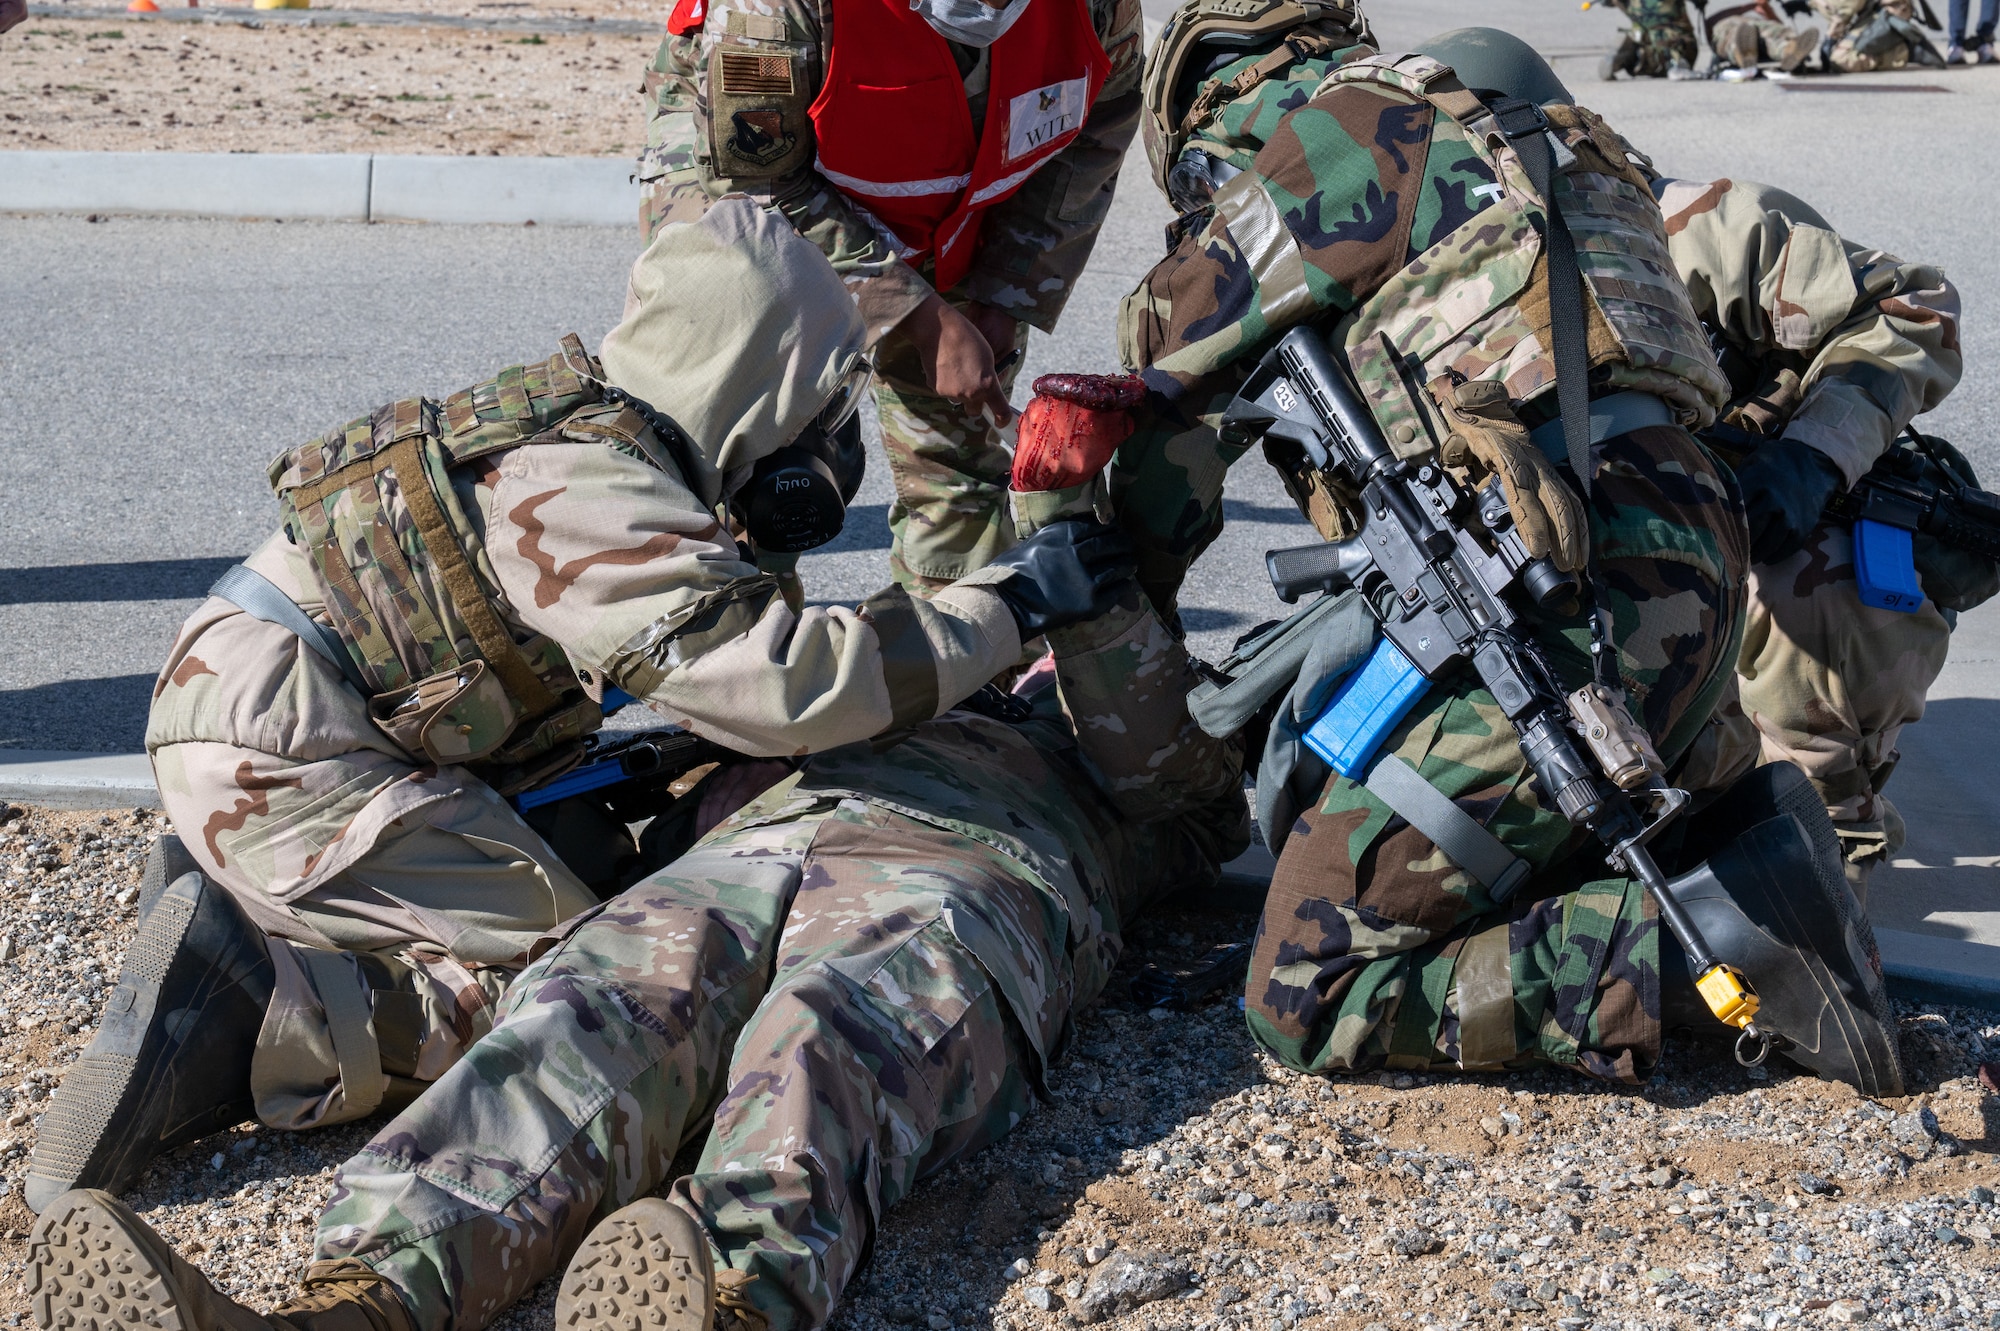 412th Security Forces Squadron Airmen treat an injured teammate during the Operation Alert Jackal deployment readiness exercise on Edwards Air Force Base, California, Dec. 2. (Air Force photo by Katherine Franco)